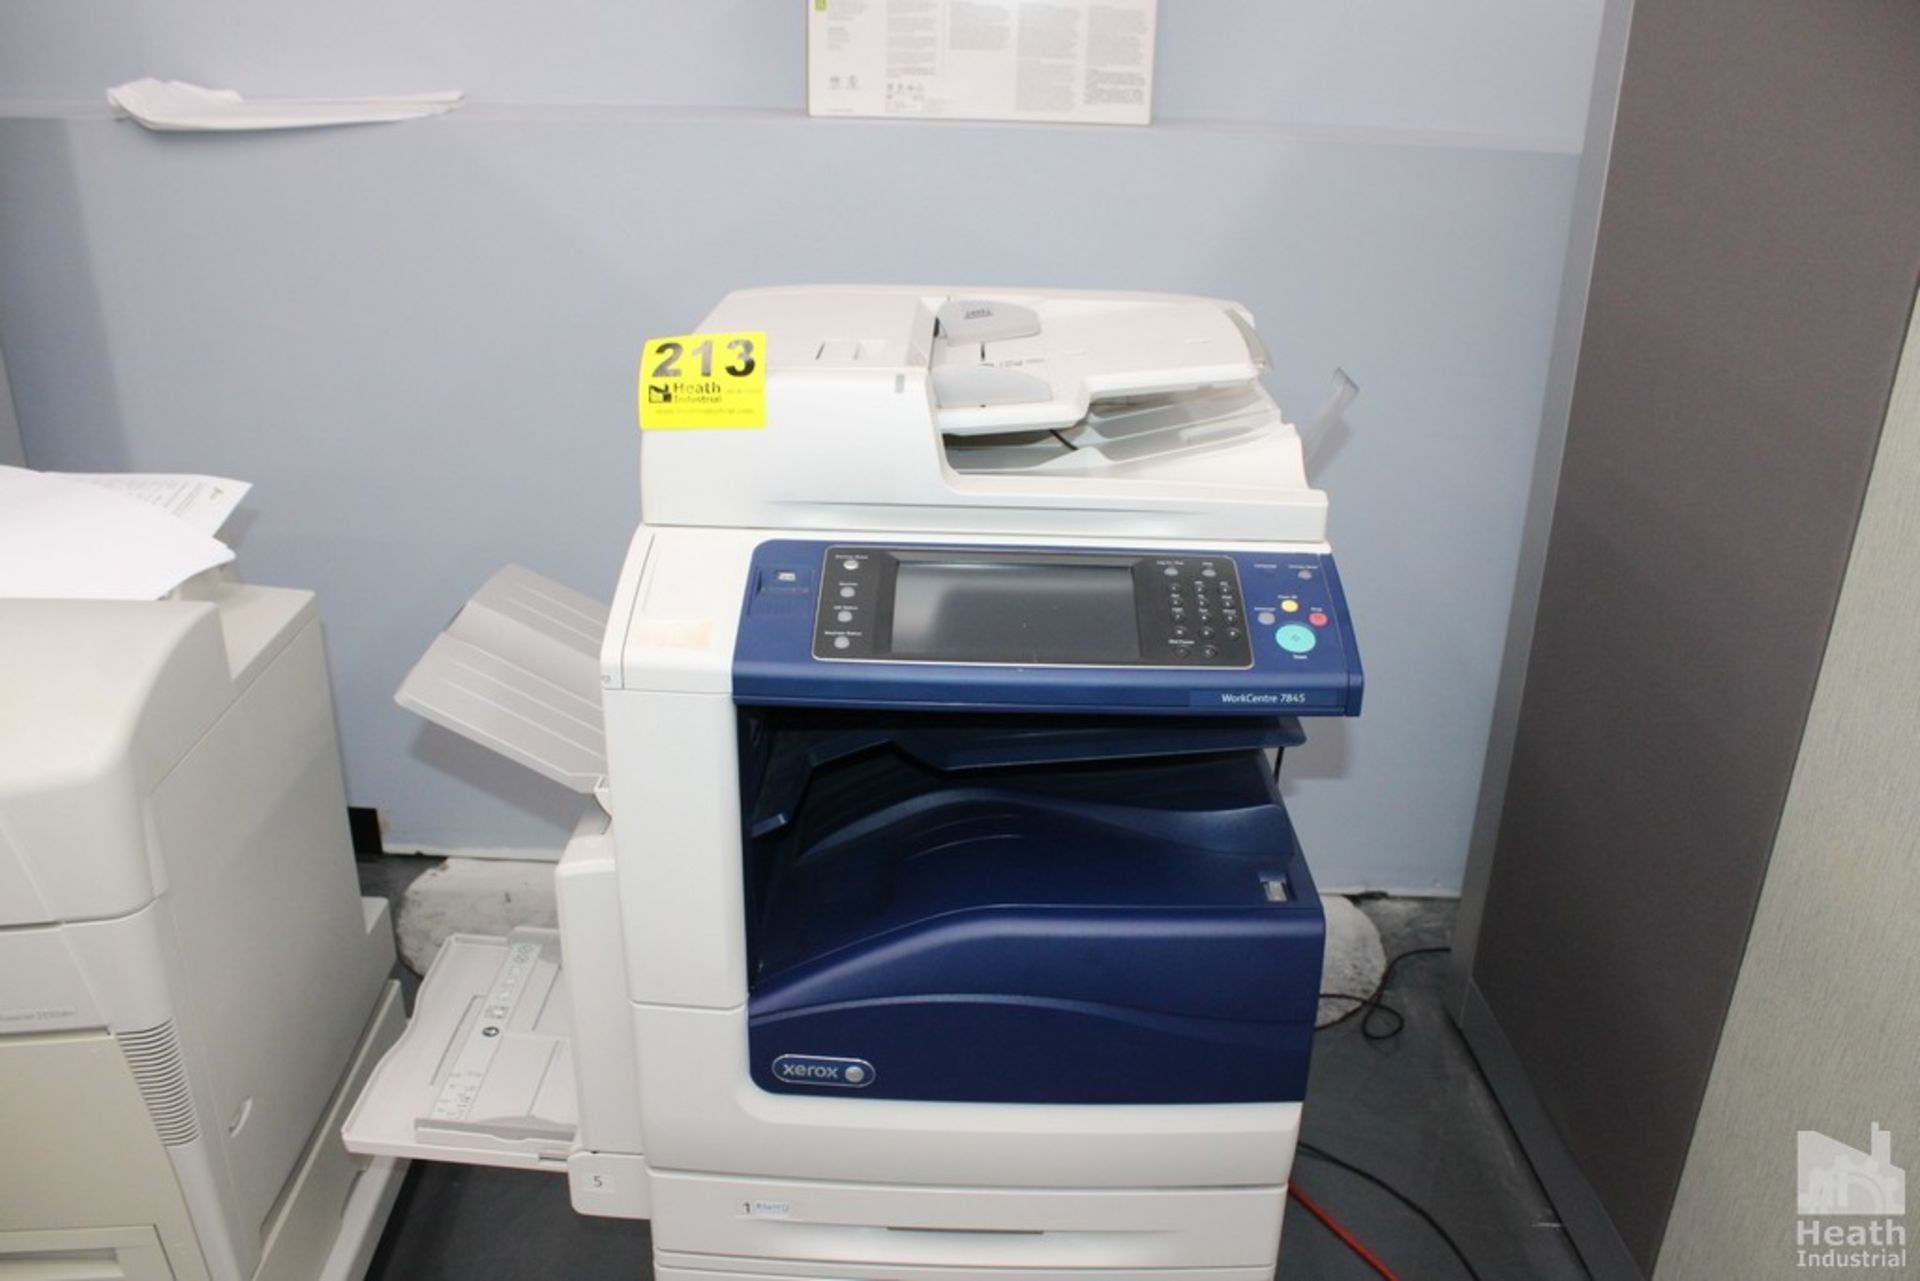 XEROX WORK CENTER 7845 MULTIFUNCTION COLOR COPIER, WITH ADF, PAPER TRAYS, ETC. - Image 3 of 3